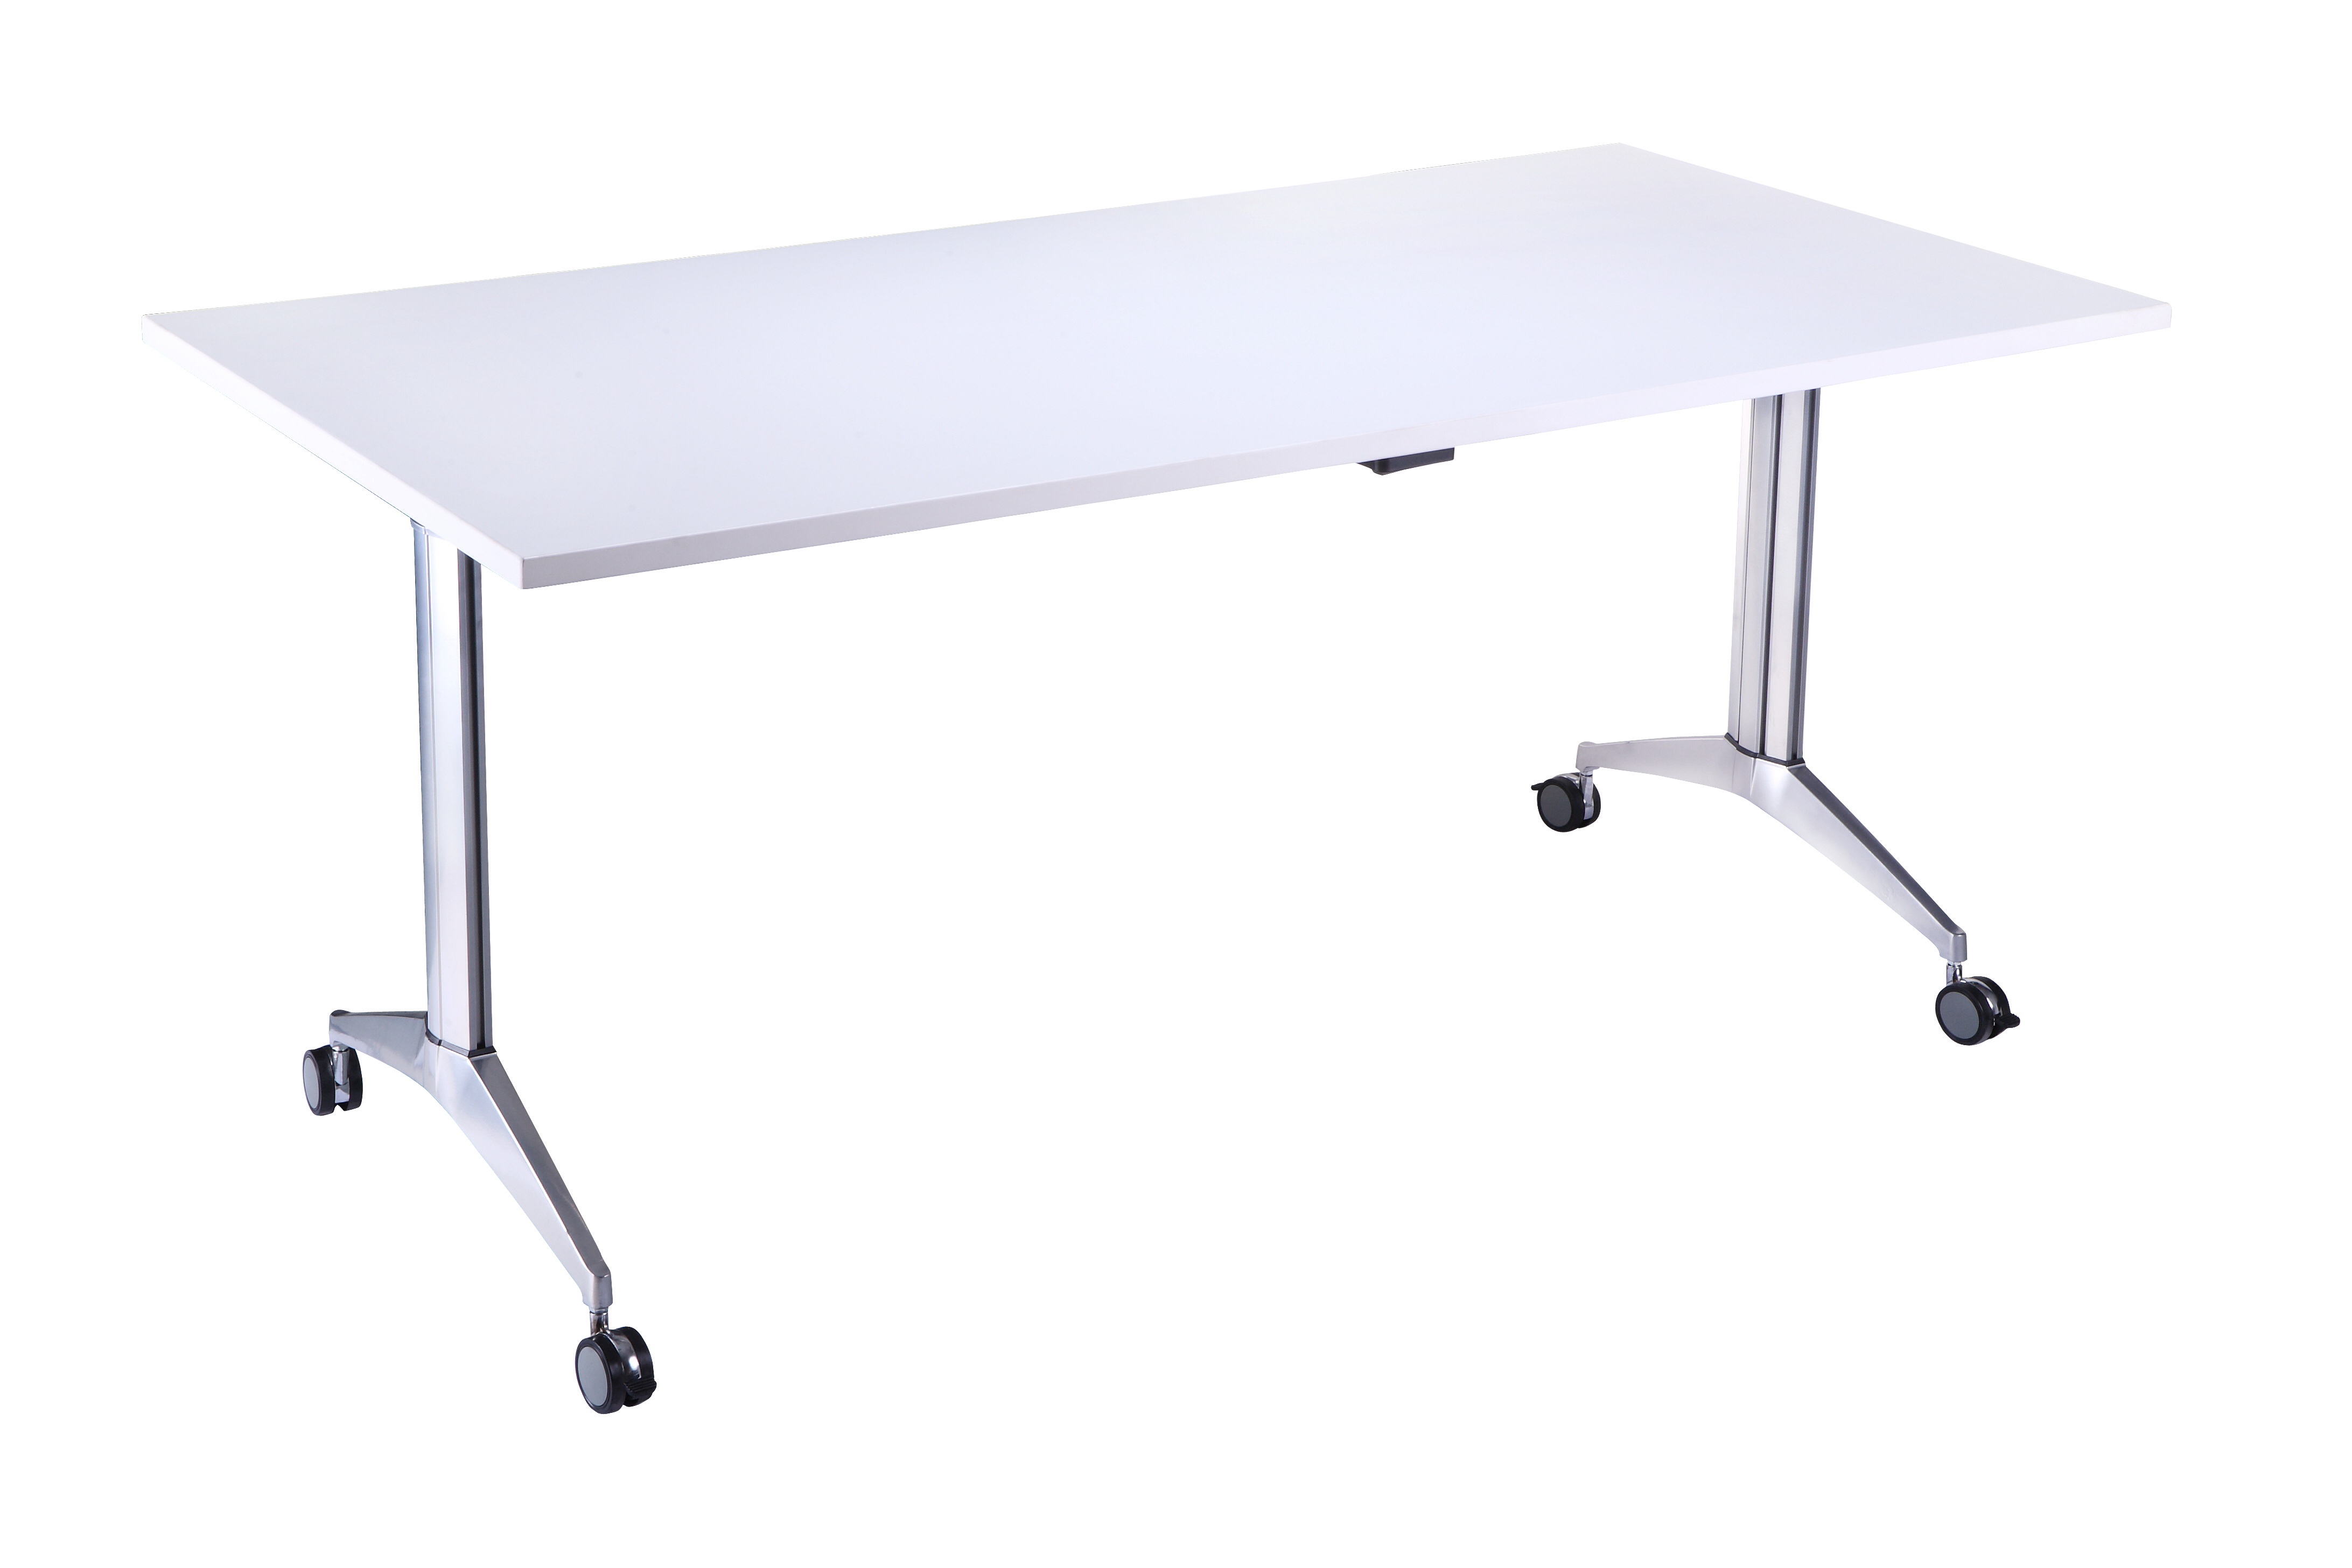 Deluxe Flip Top Mobile folding meeting table with linking device